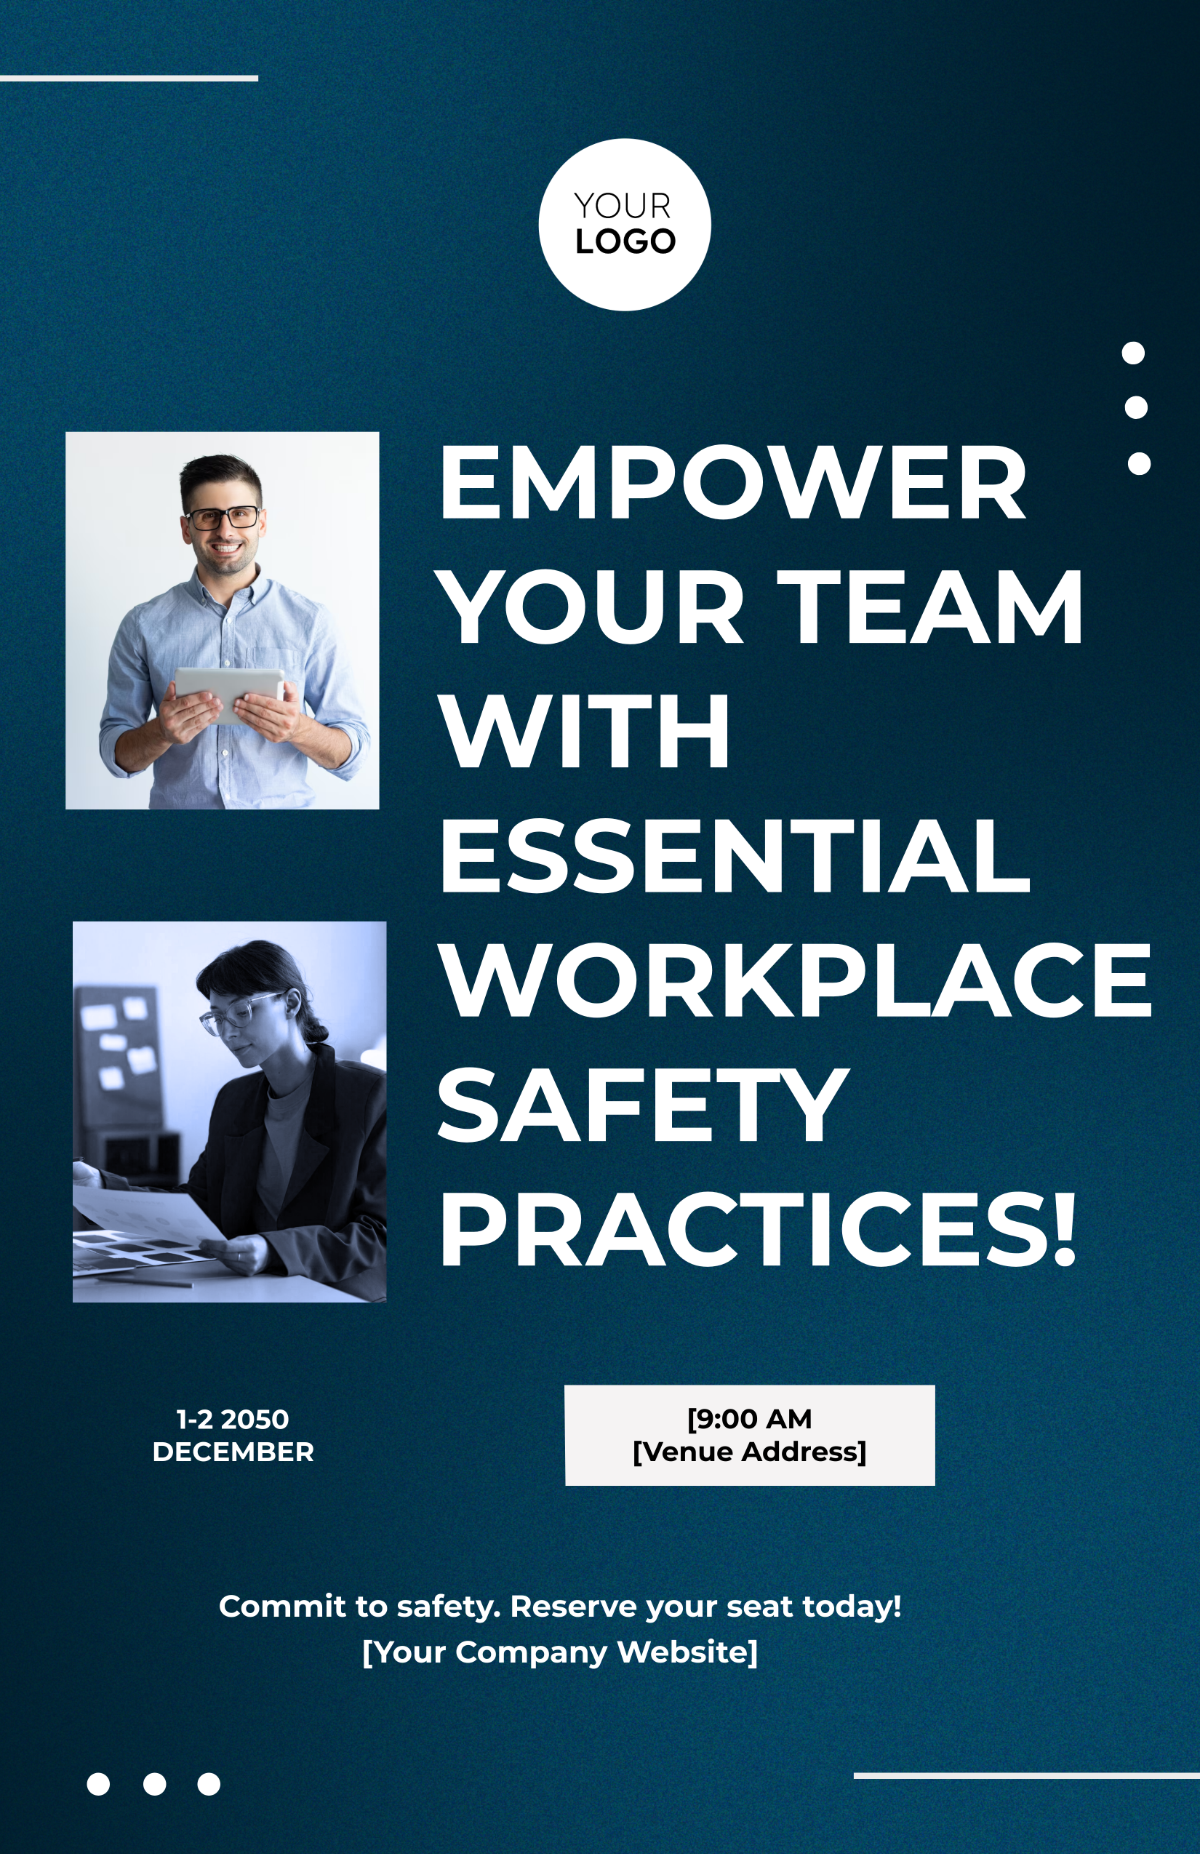 Workplace Safety Training Seminar Poster Template